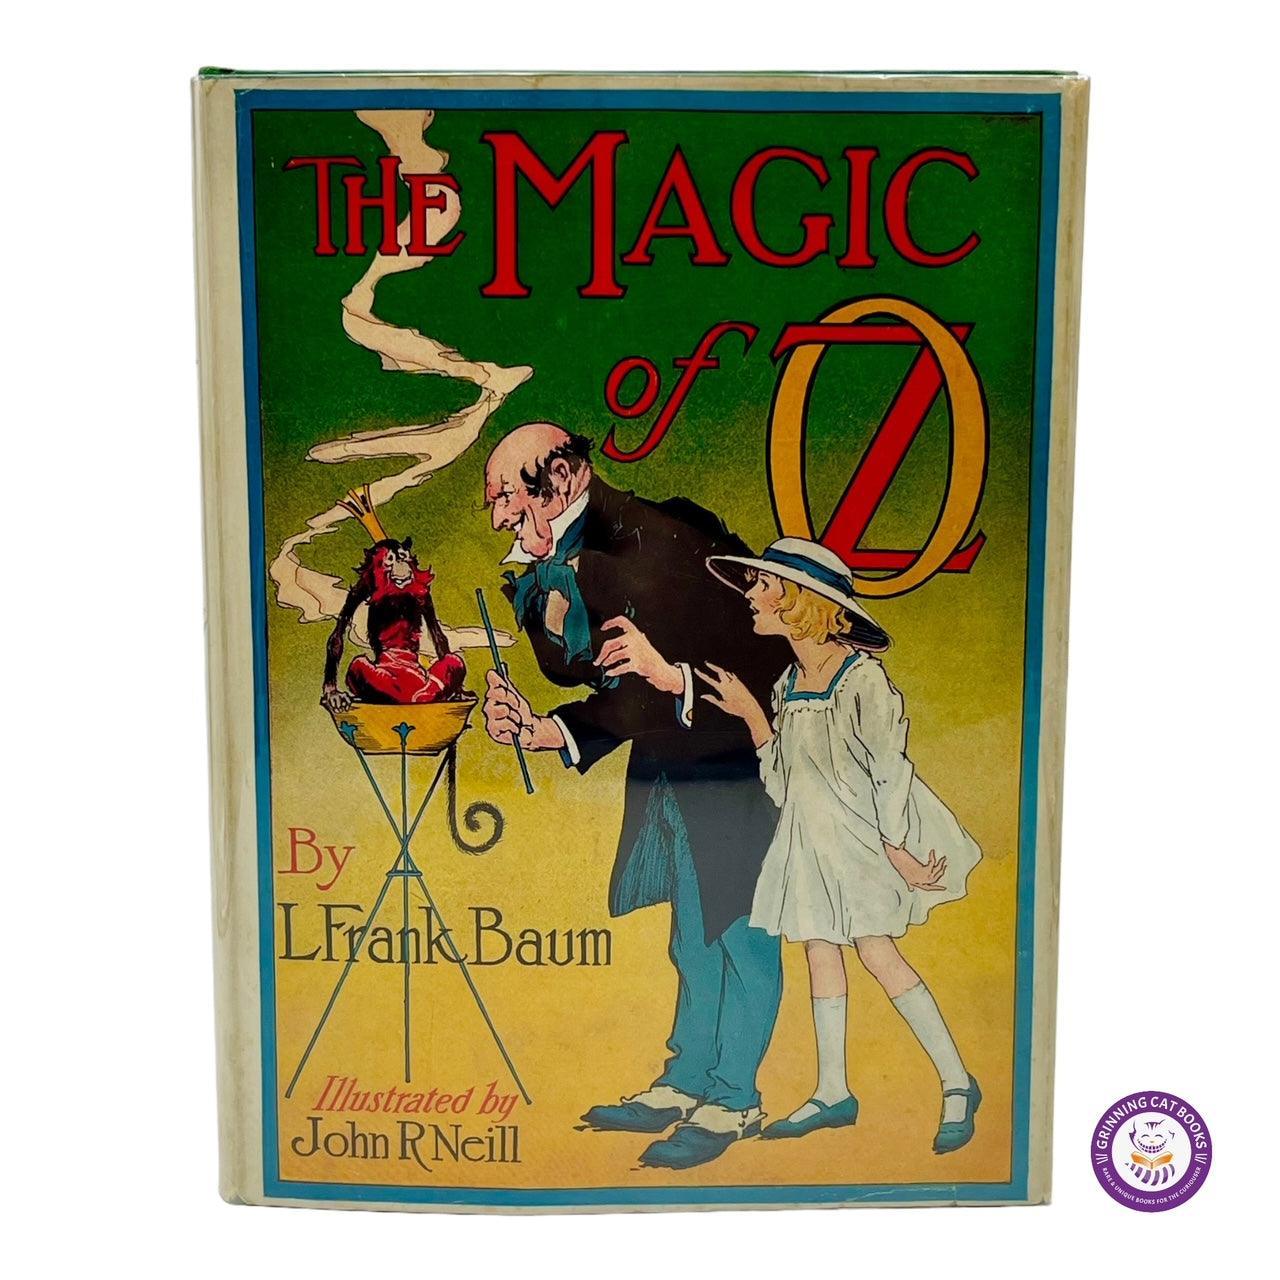 The Magic of Oz (the first of Baum's final two books, published one month after his death) - Grinning Cat Books - CHILDREN'S LITERATURE - OZ